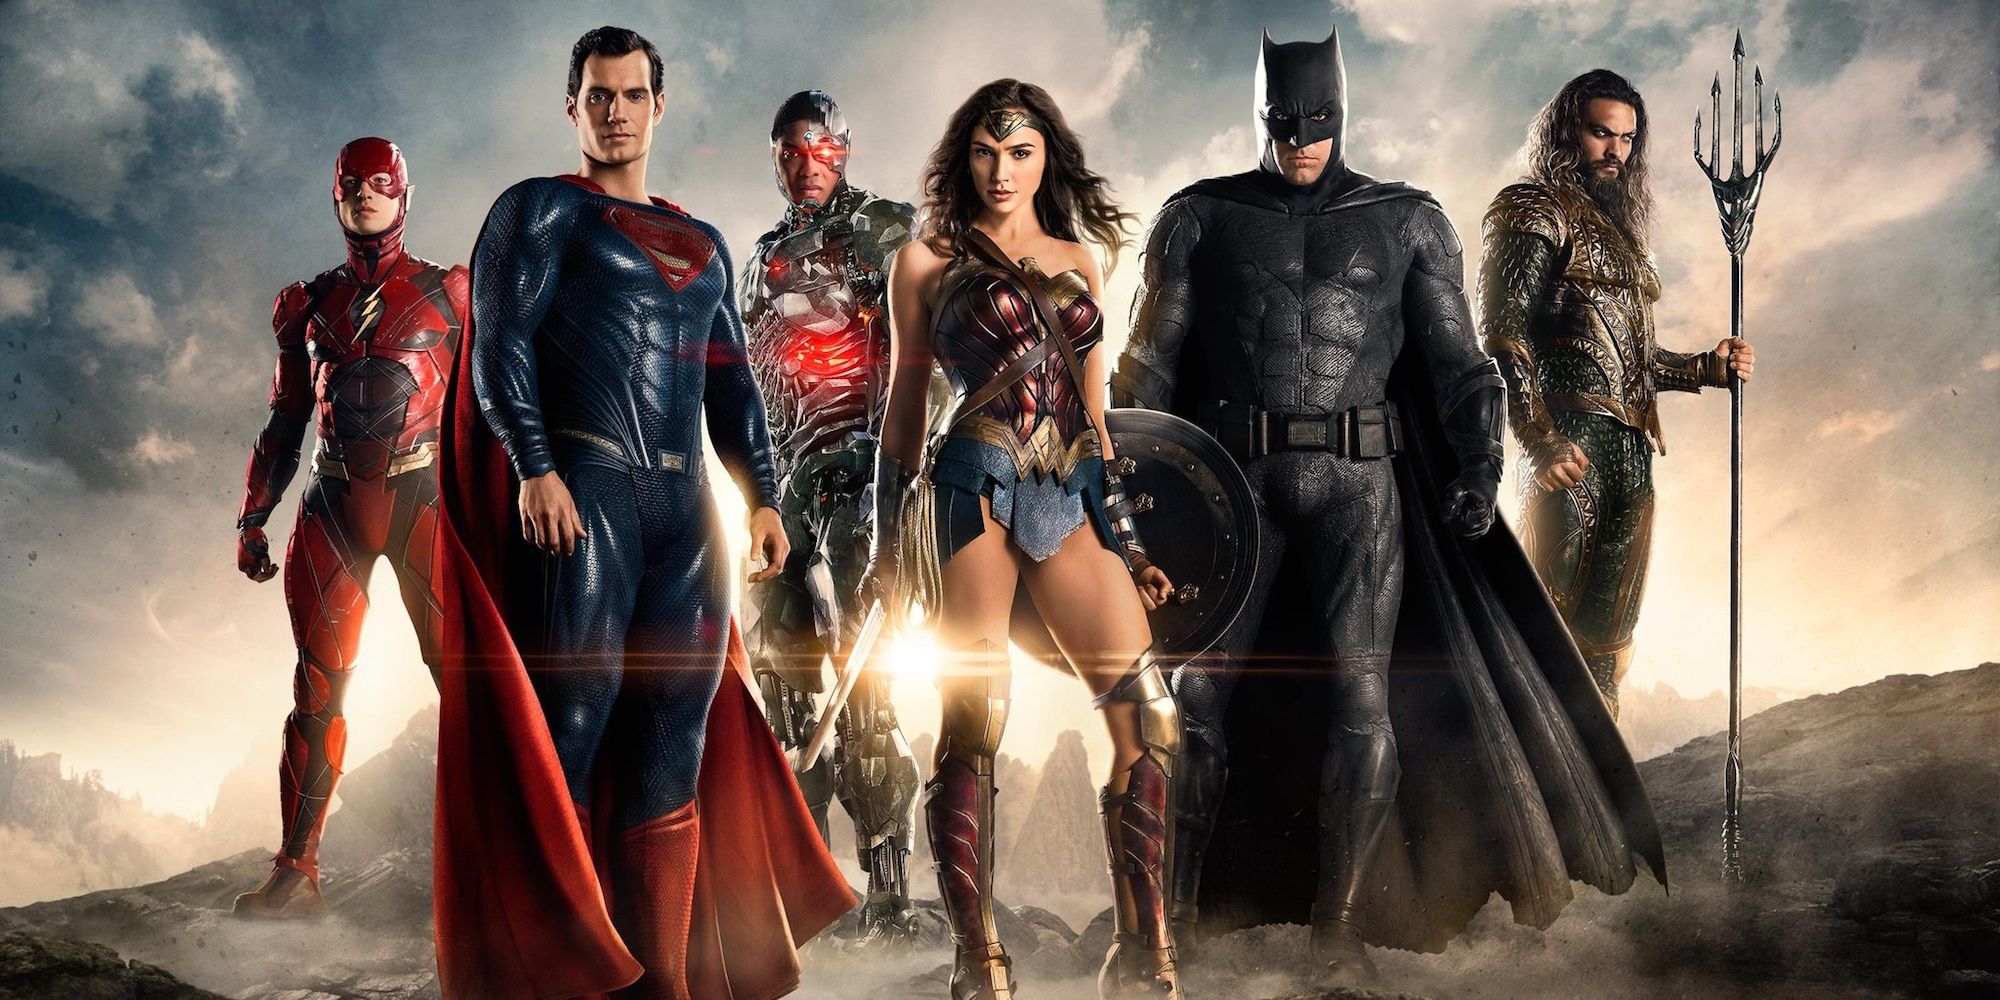 Justice League Rated PG13; Zack Snyder Only Credited Director